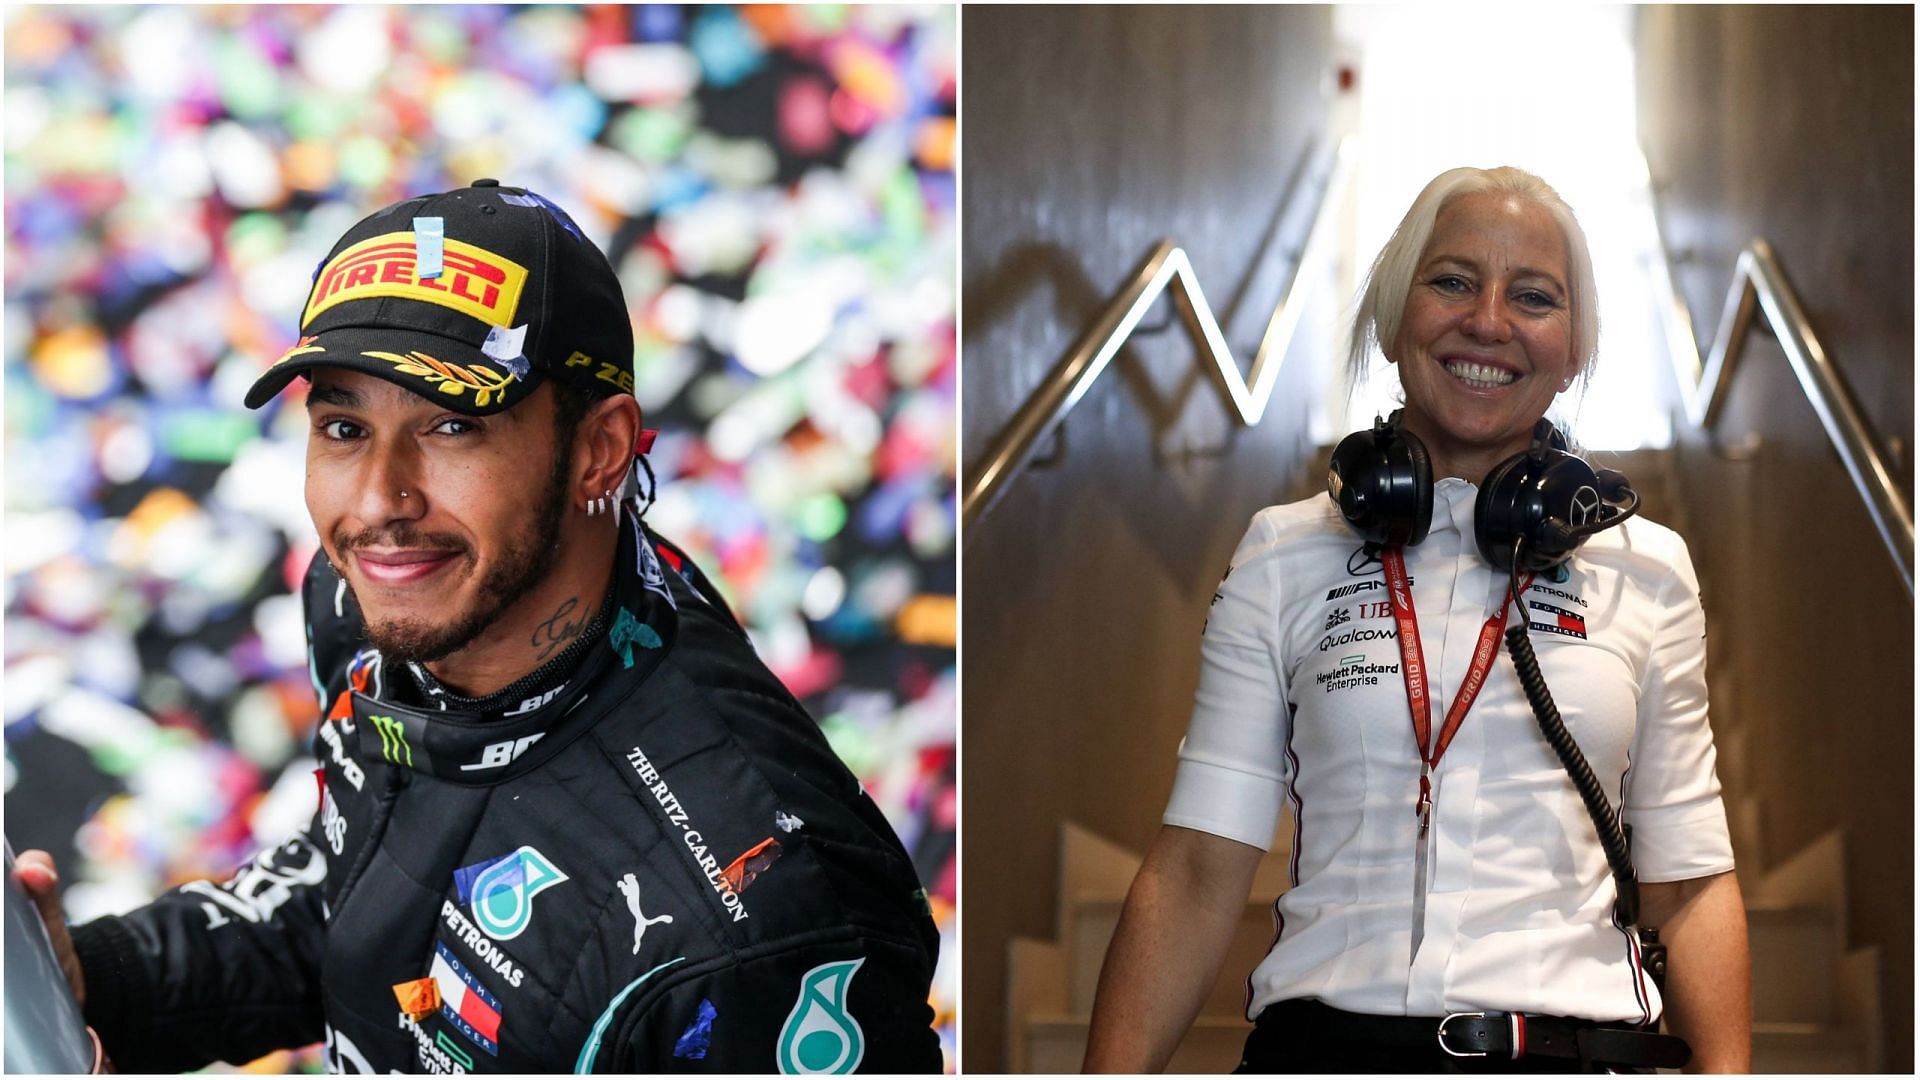 Angela Cullen (R) has been with Lewis Hamilton (L) for a long time now